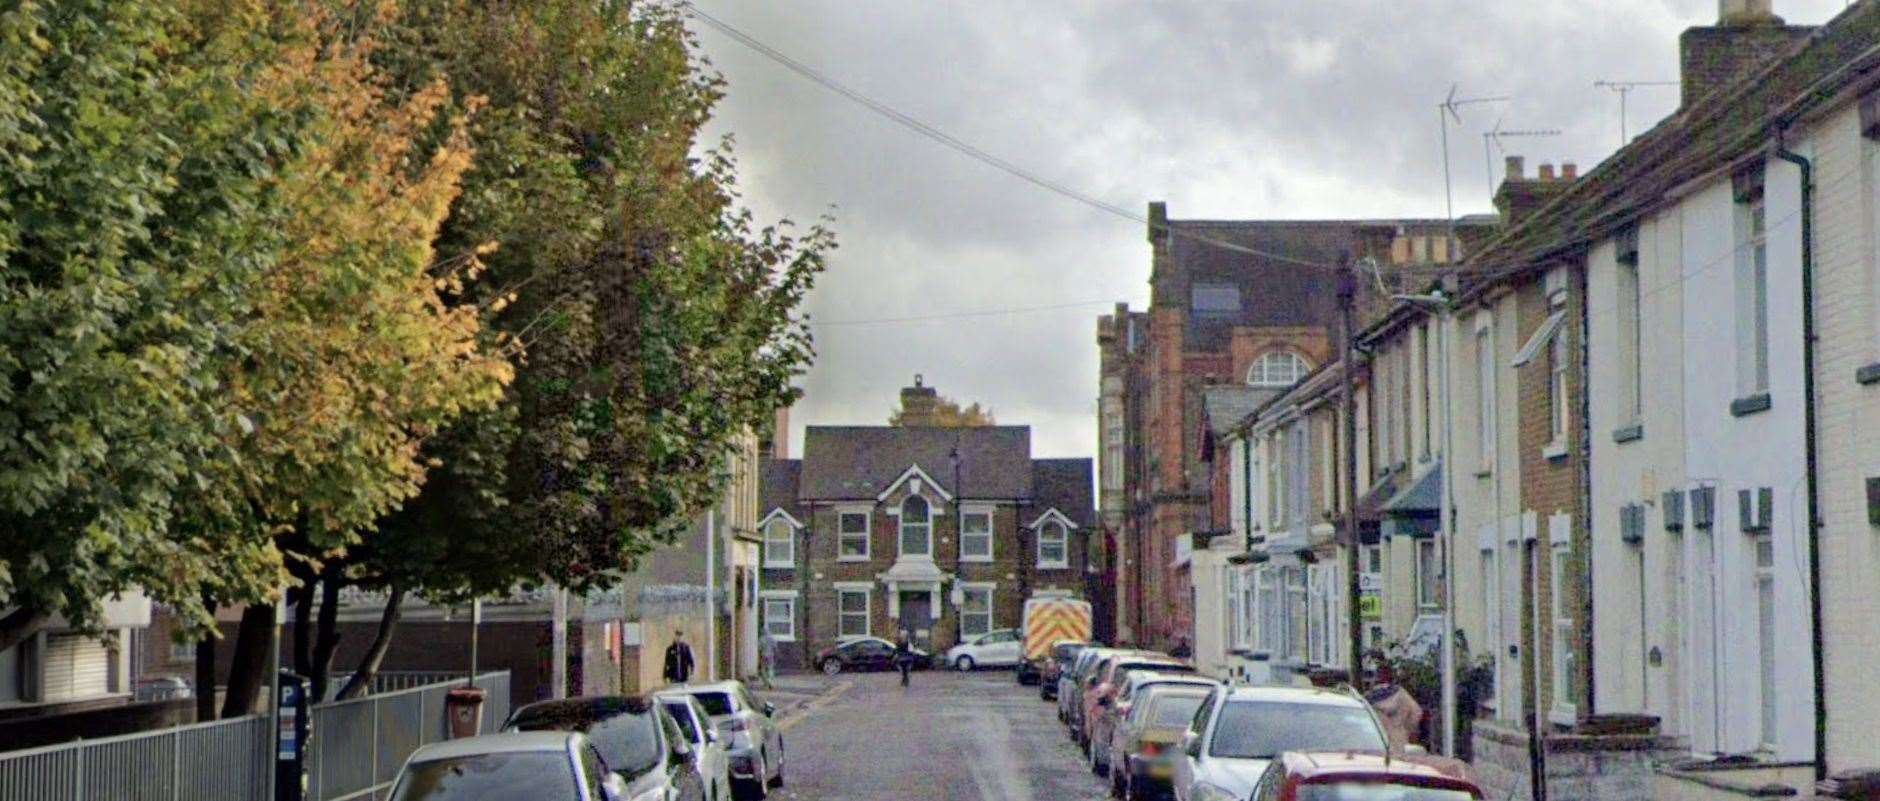 Fire services were called to a home in Green Street, Gillingham. Picture: Google Maps